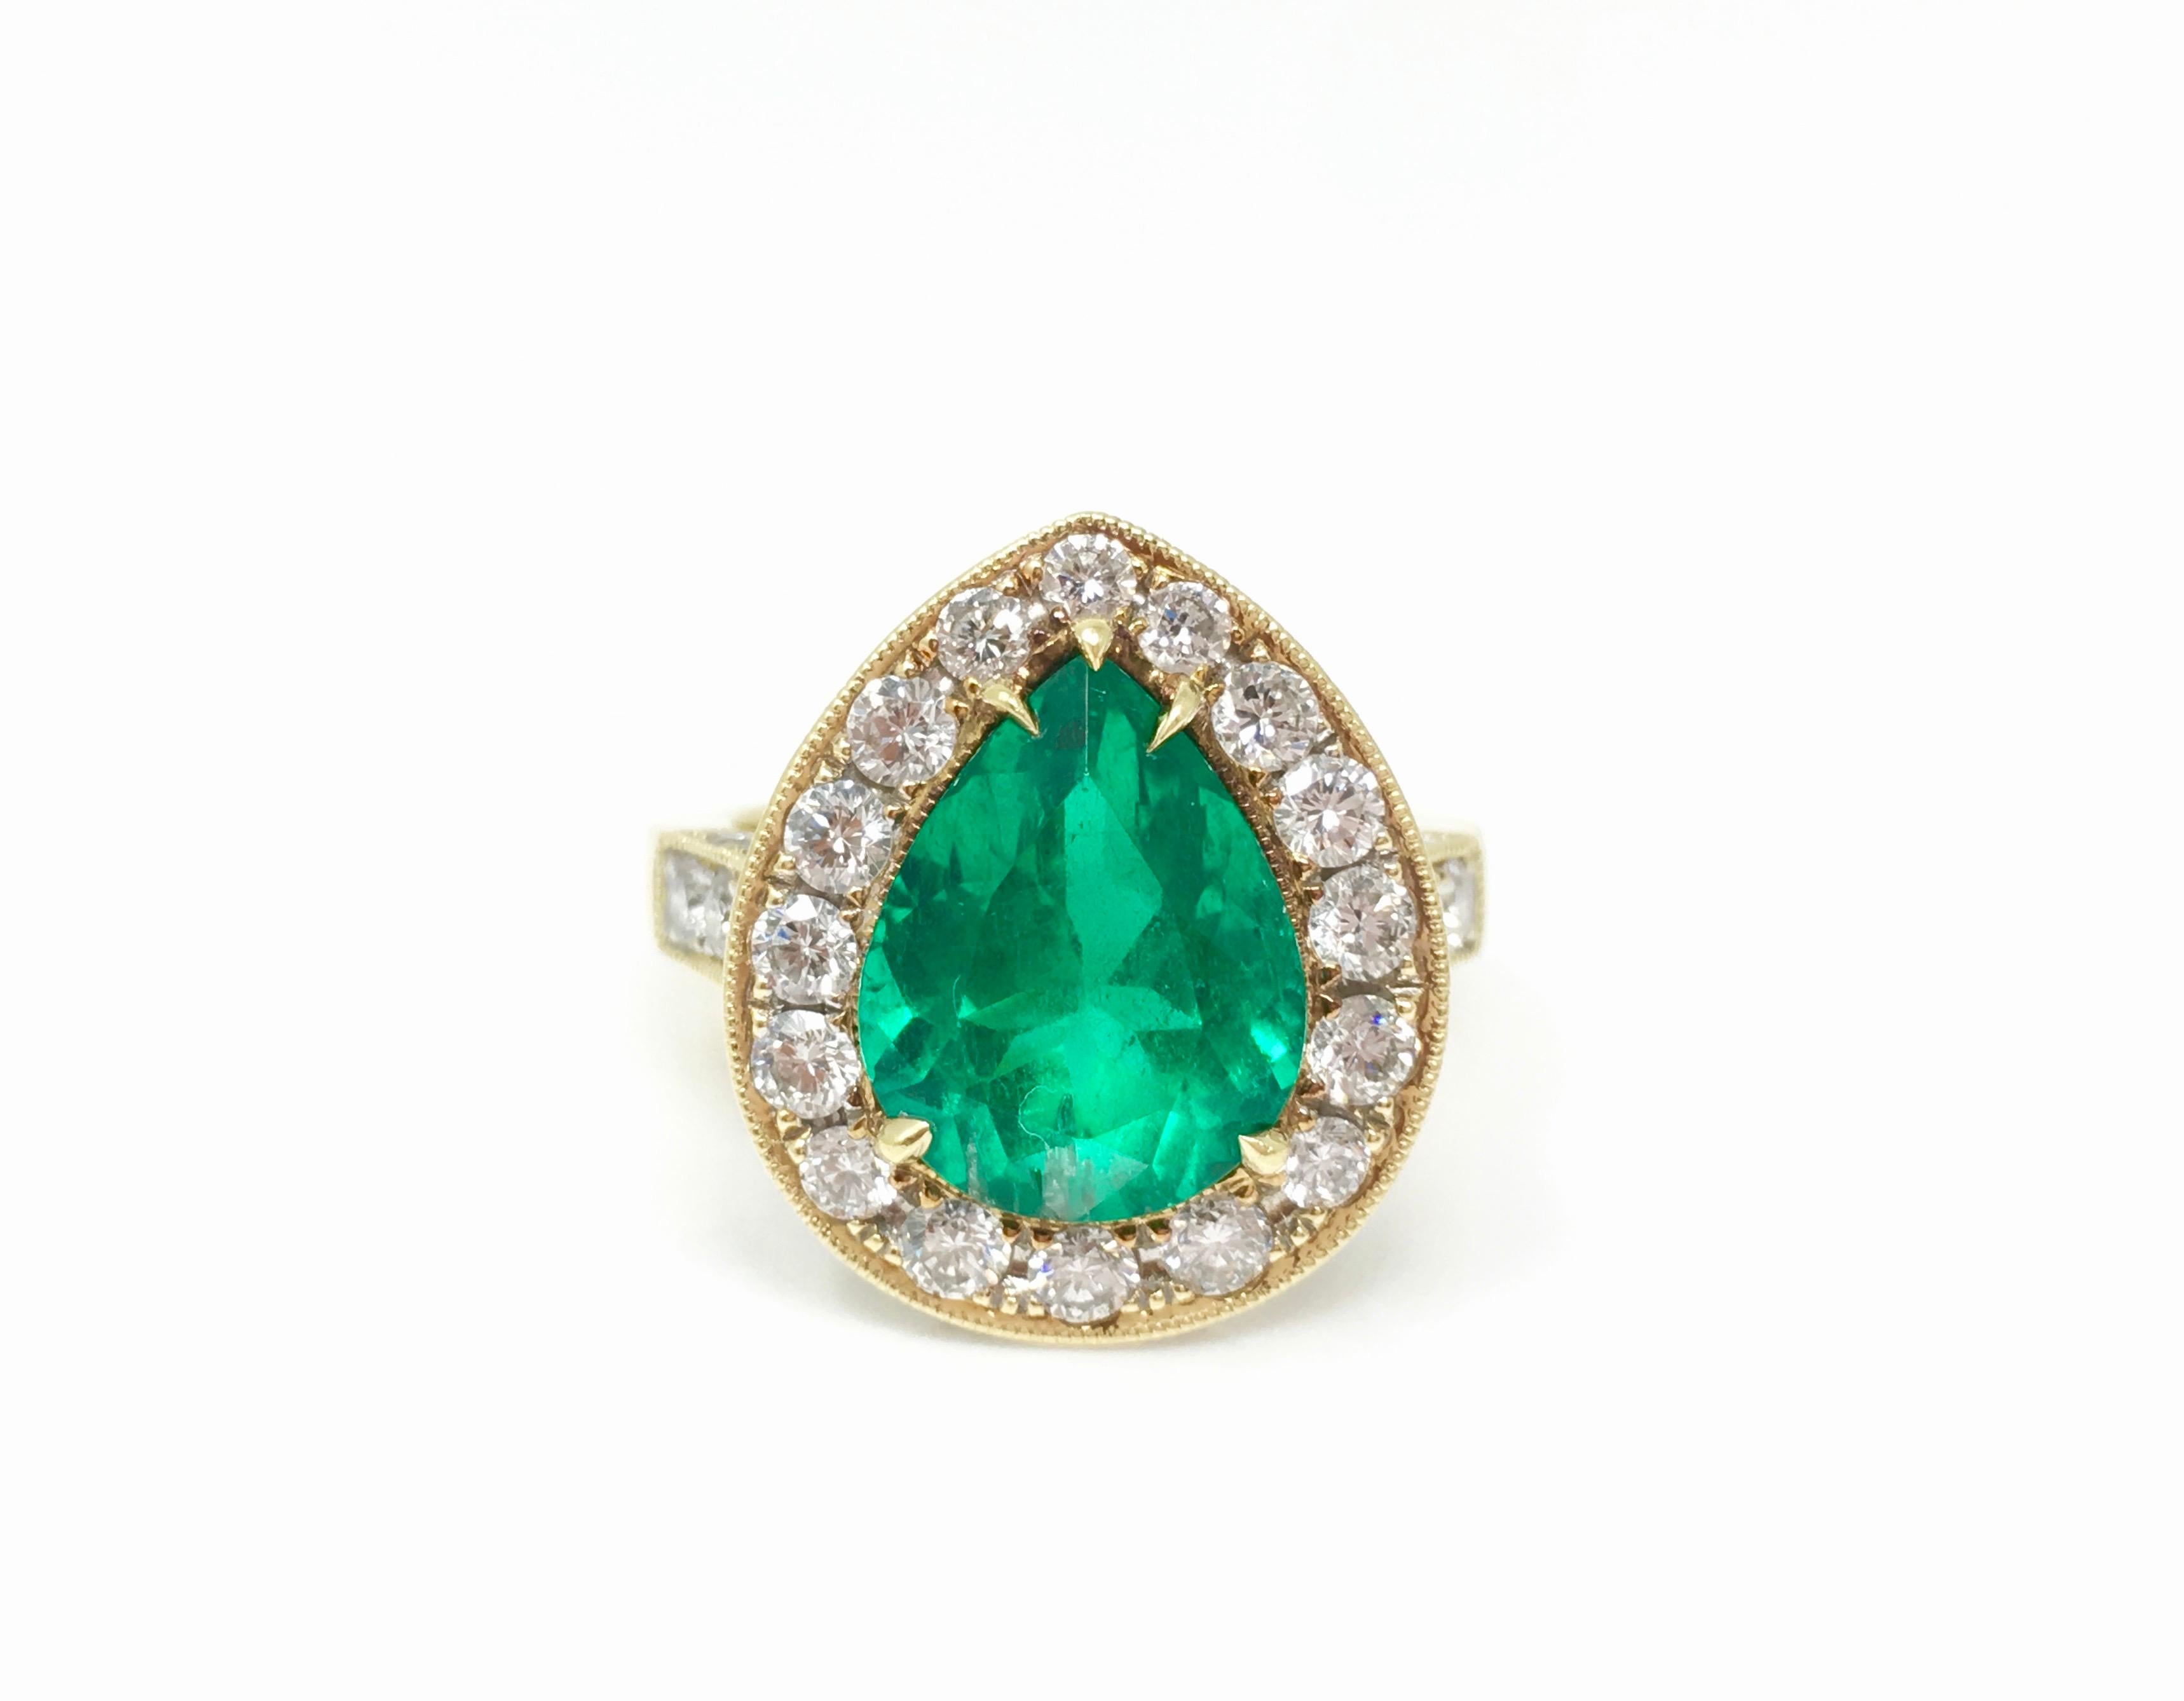 An extraordinary vivid green GIA certified Colombian emerald displays an incredible depth of color and brilliance in this eye catching ring.
The details are as follows : 
Emerald weight : 3.25 carat ( vivid green color) 
Diamond weight : 1.01 carat